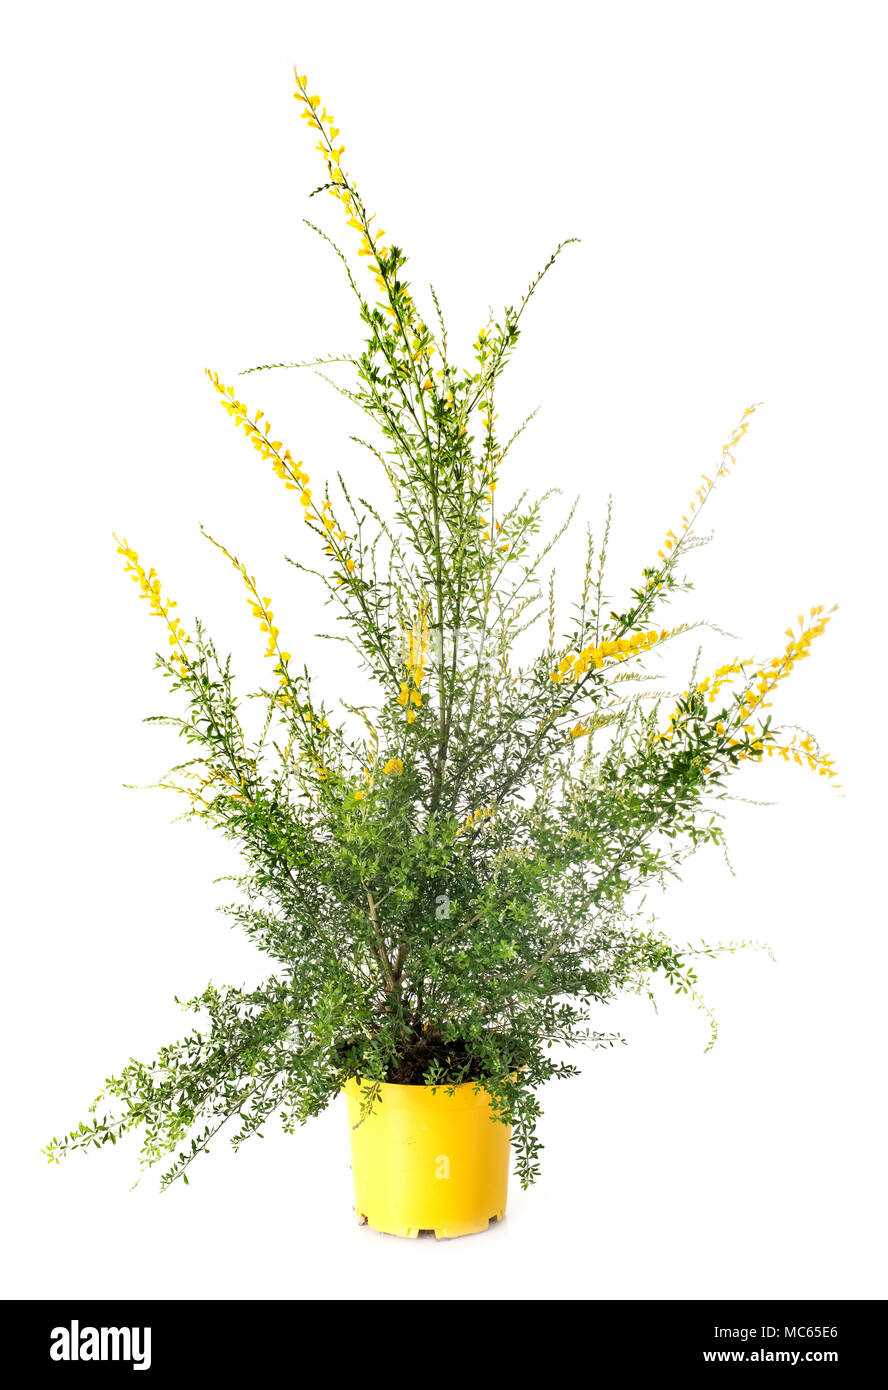 genista maderensis in front of white background Stock Photo